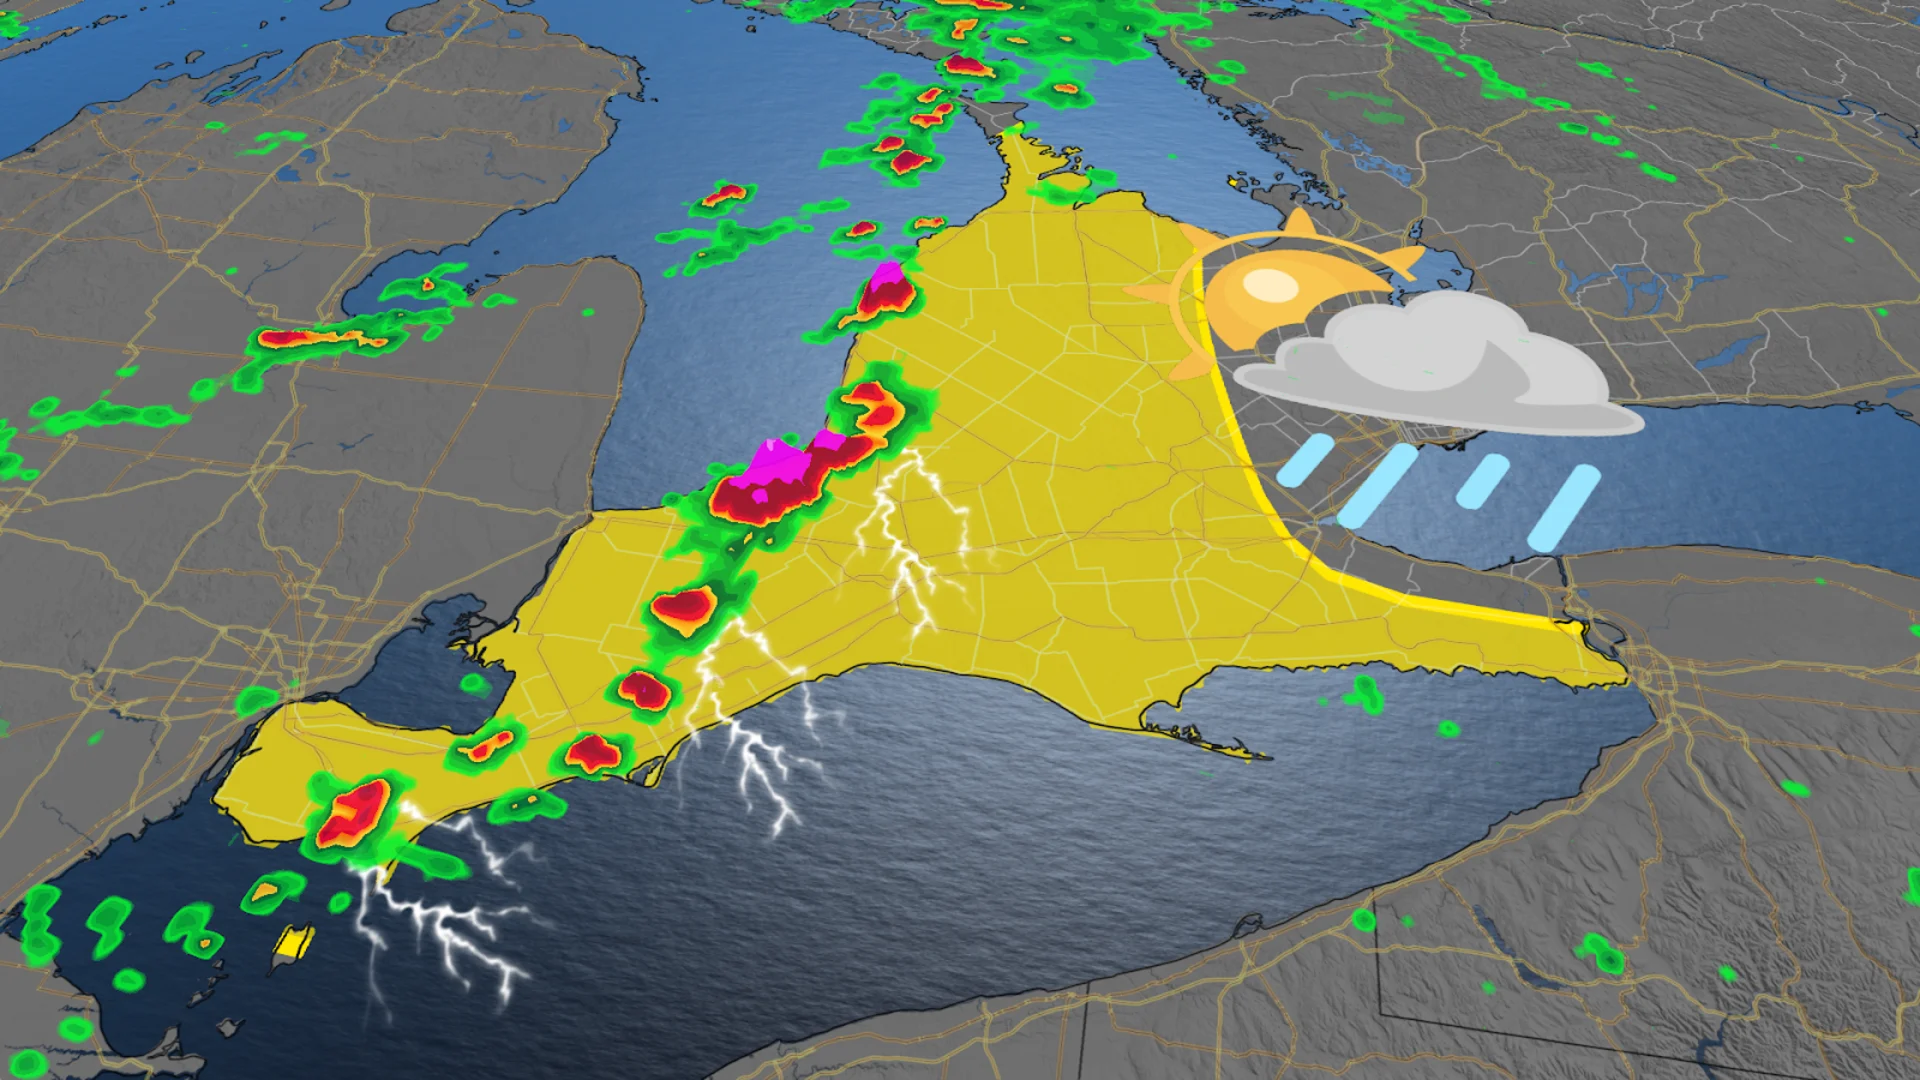 Thunderstorm threat spans parts of southern Ontario Monday night. Here’s what to watch for 